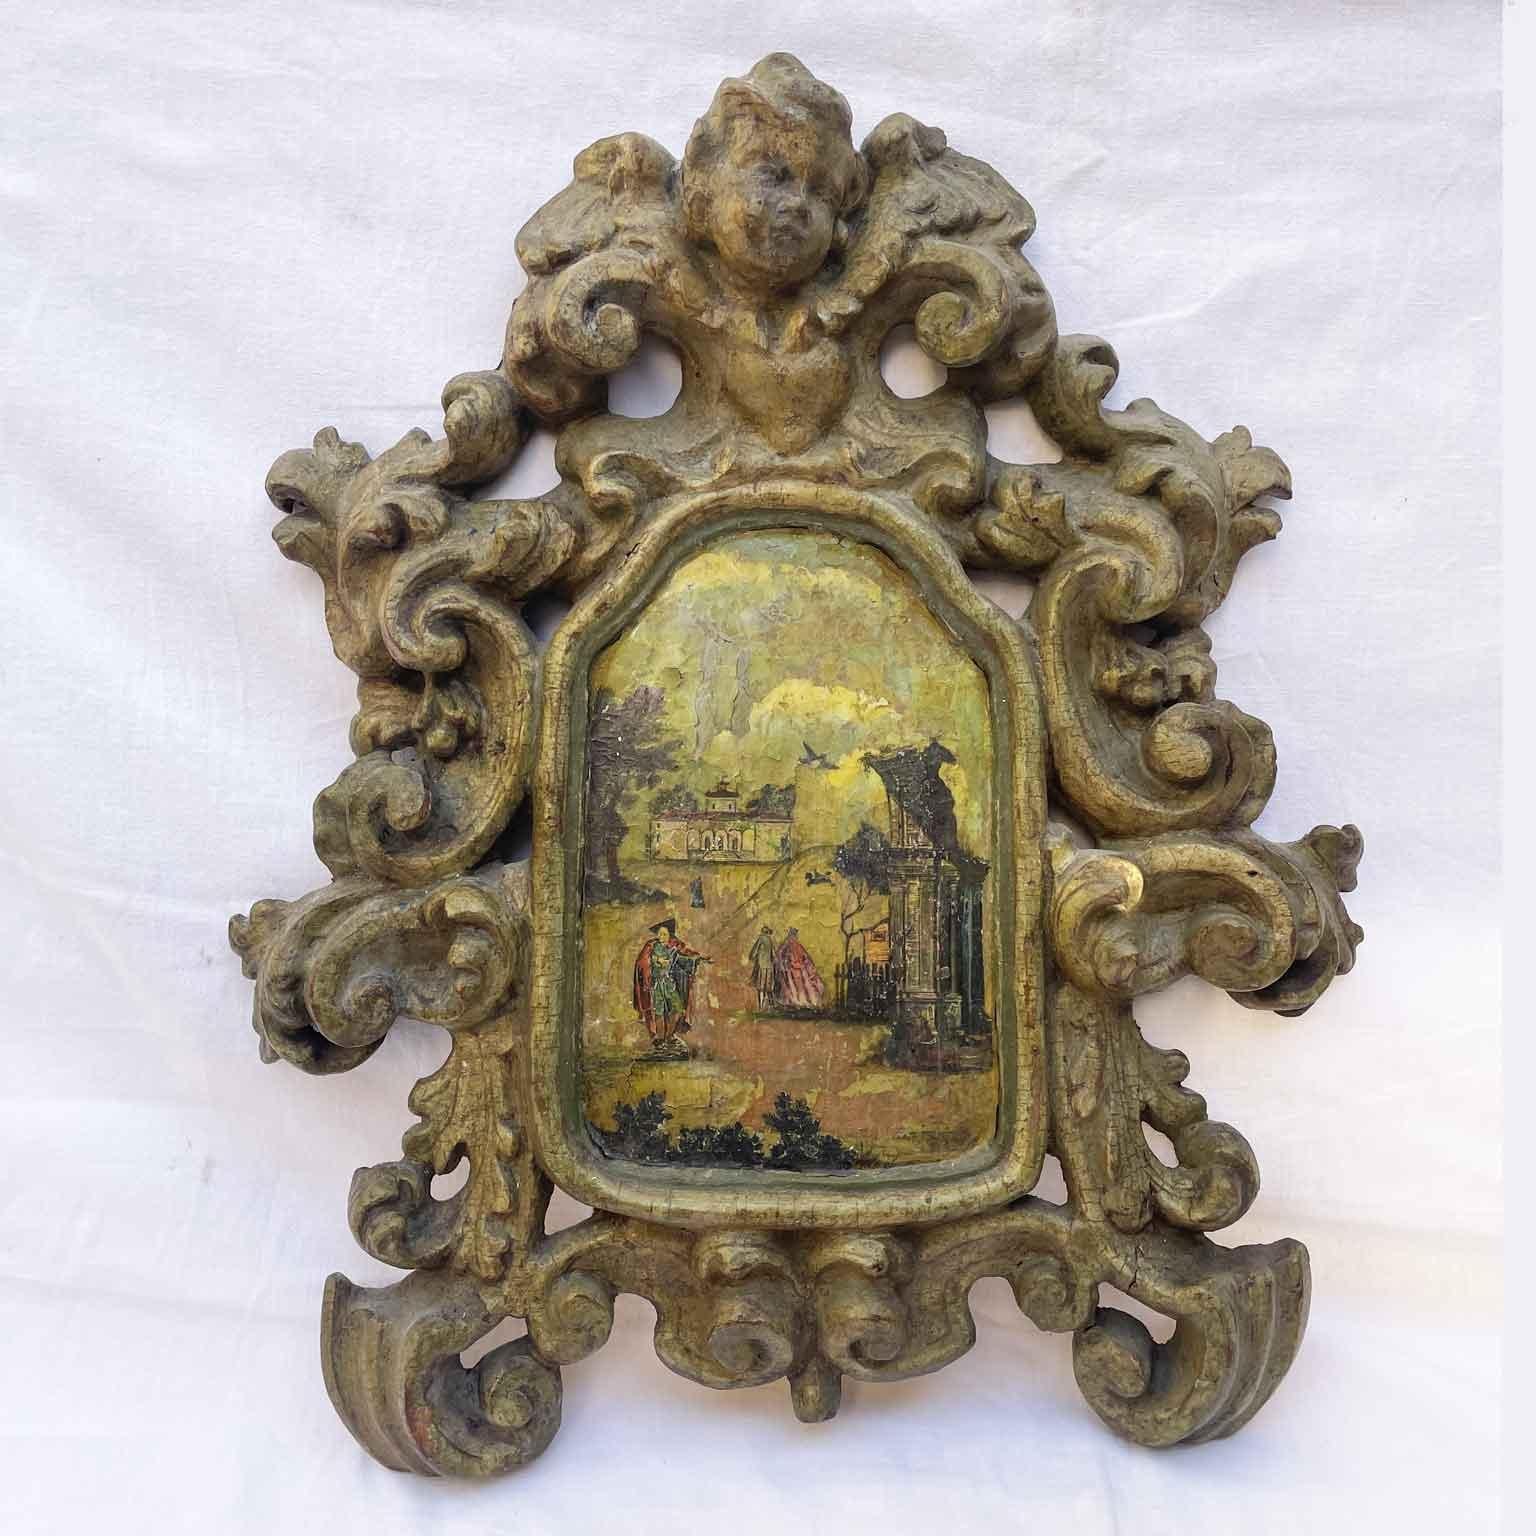 Pair of Baroque Frames With Putti and Landscape carved in a single basswood board and composed of richly carved foliage and and chasing scrolls  and intertwine until culminating at the top with a putto, the face of a winged cherub. The